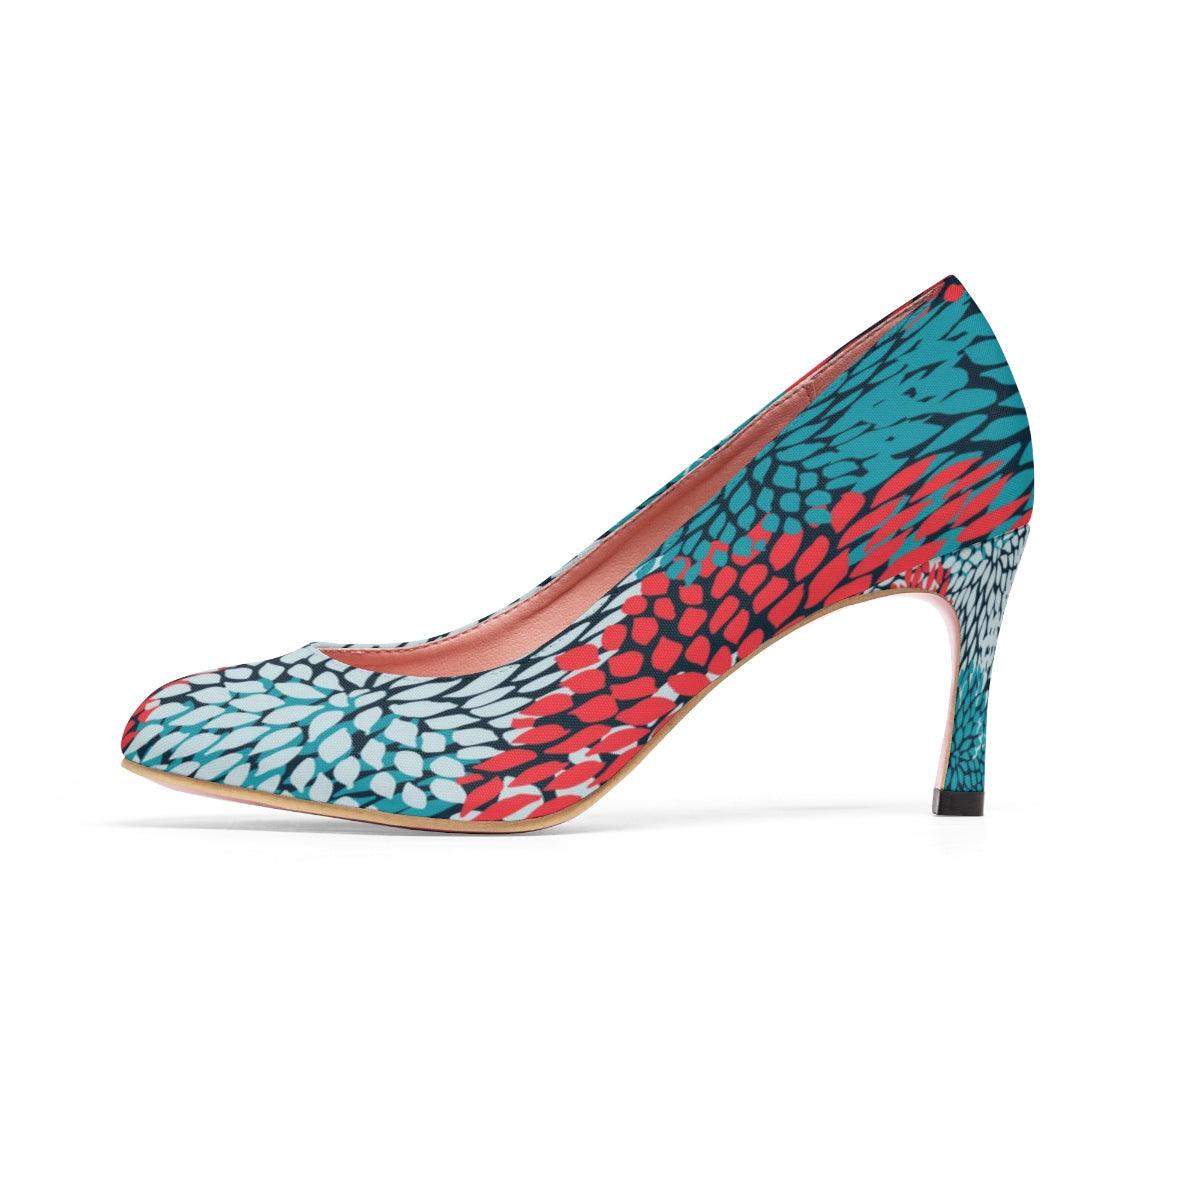 Colorful Feathers Women's High Heels - Buyashoes